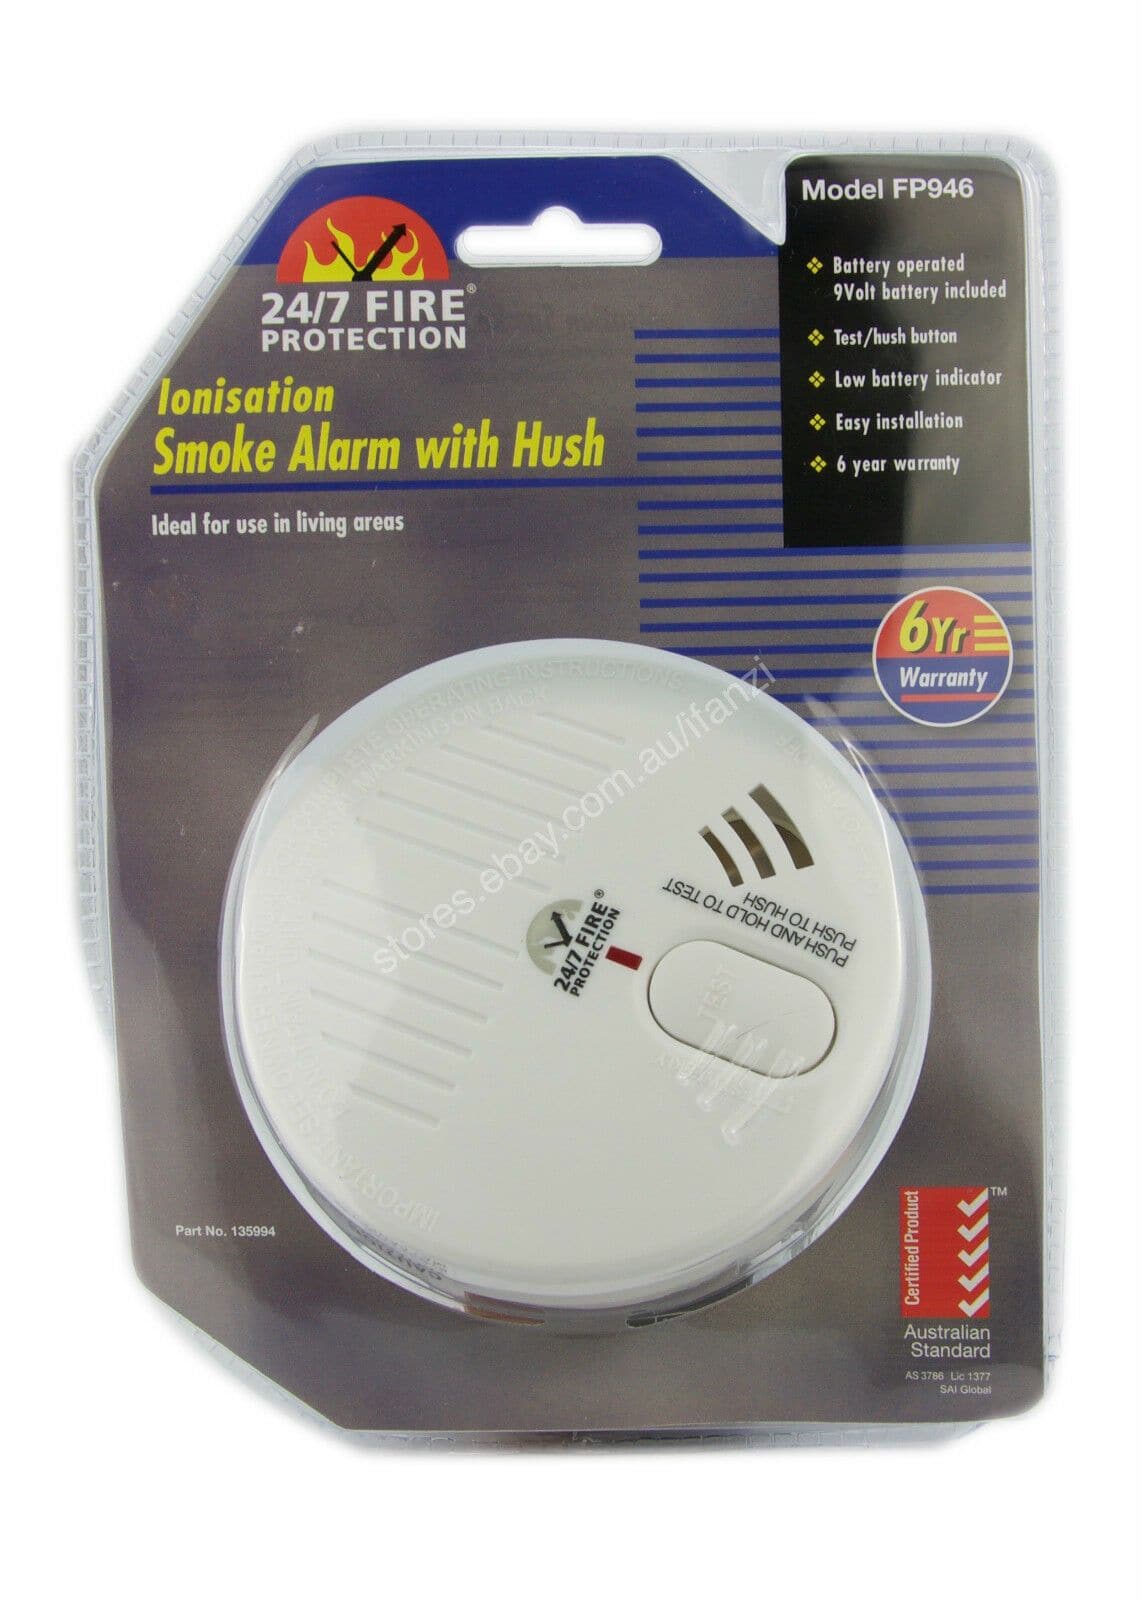 24/7 Fire Protection Ionisation Smoke Alarm with Hush FP946 - Double Bay Hardware